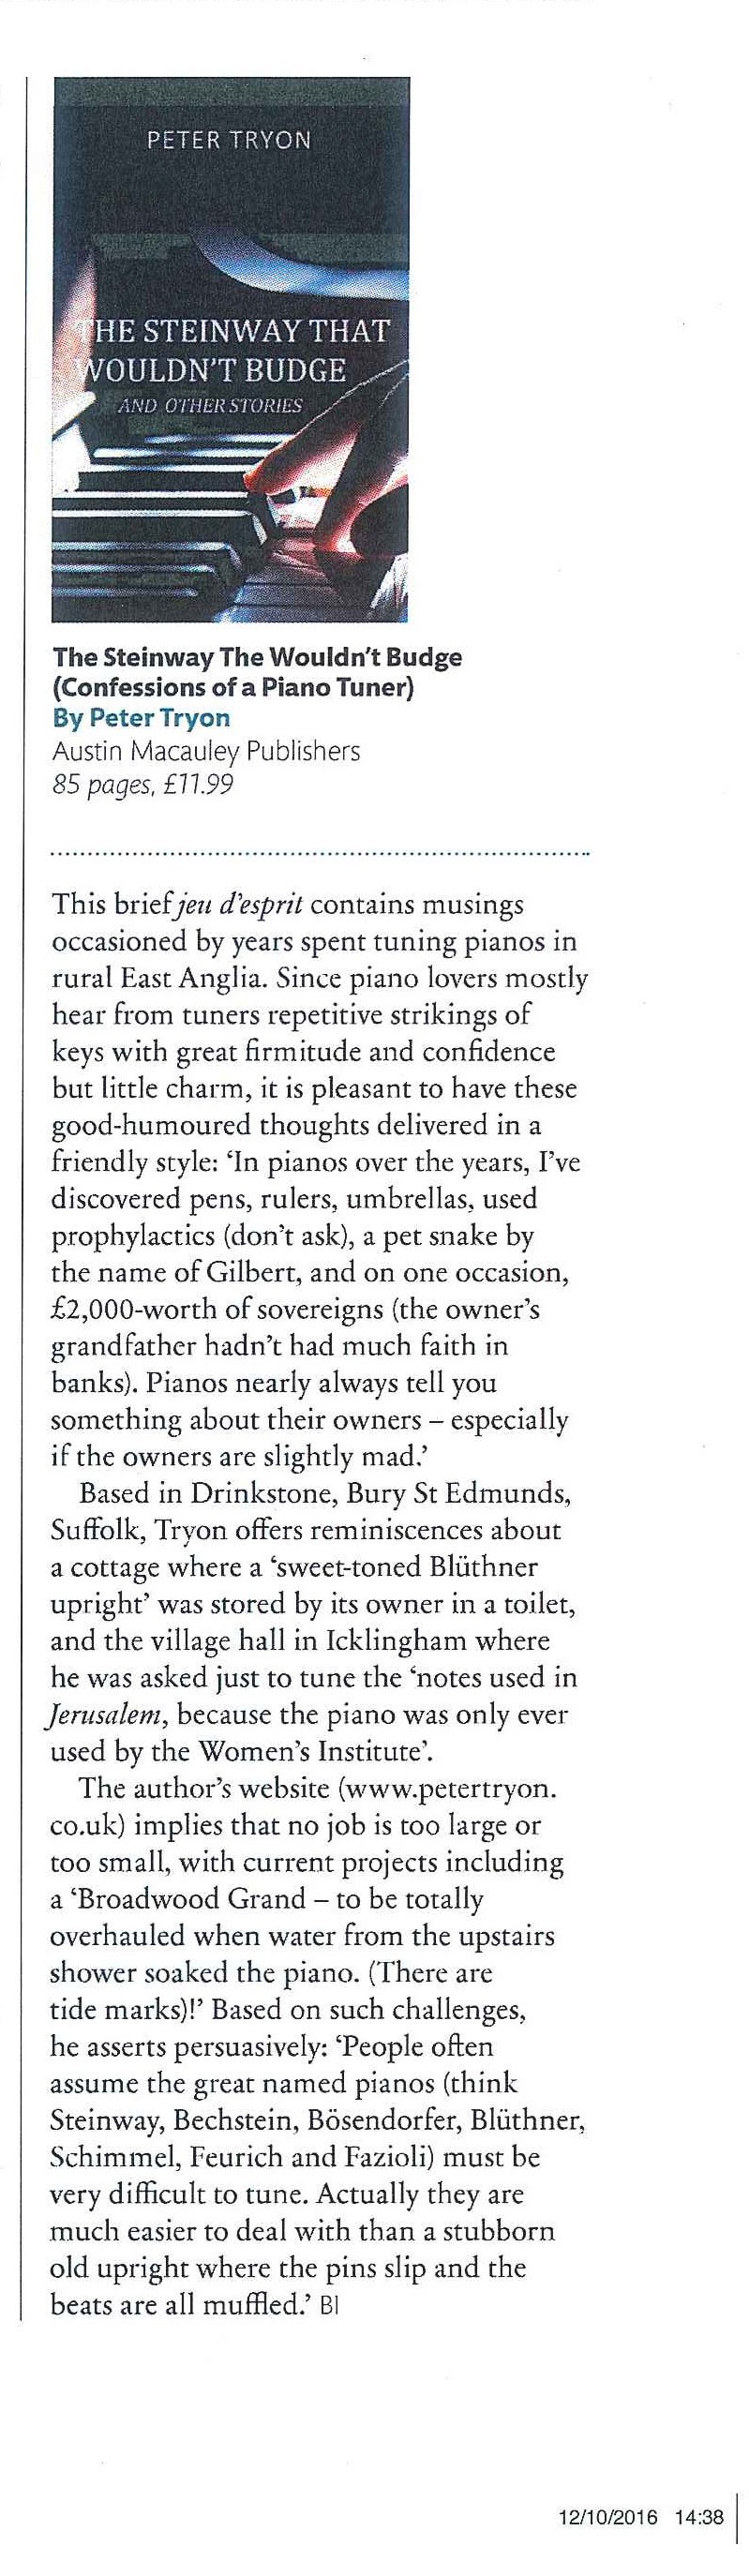 Peter Tryon's 'The Steinway that Wouldn't Budge' was reviewed by International Piano Magazine